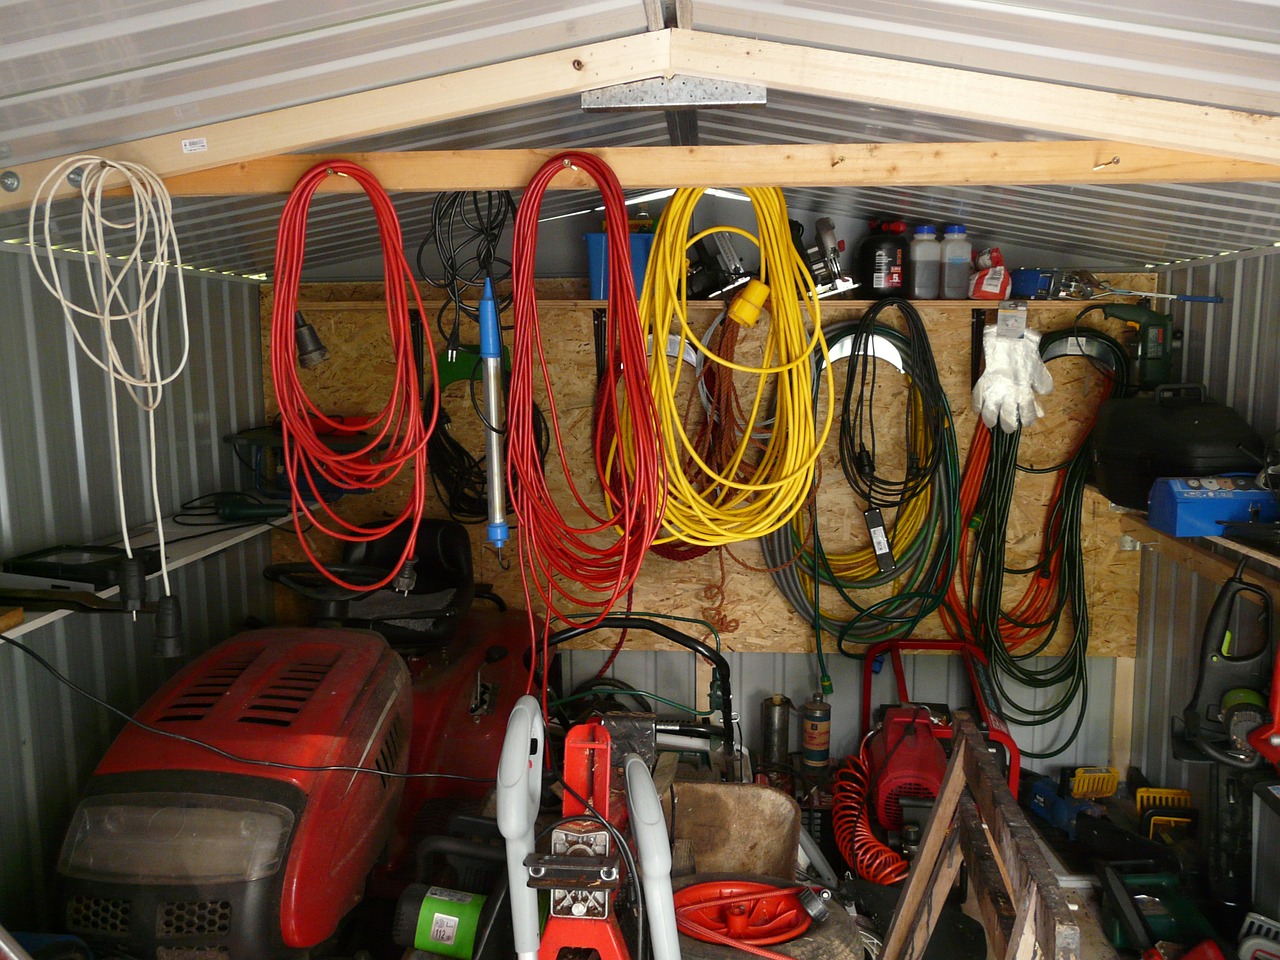 garage,tool,cable,scale,hut,work,tractor,gloves,tool shed,devices,free pictures, free photos, free images, royalty free, free illustrations, public domain